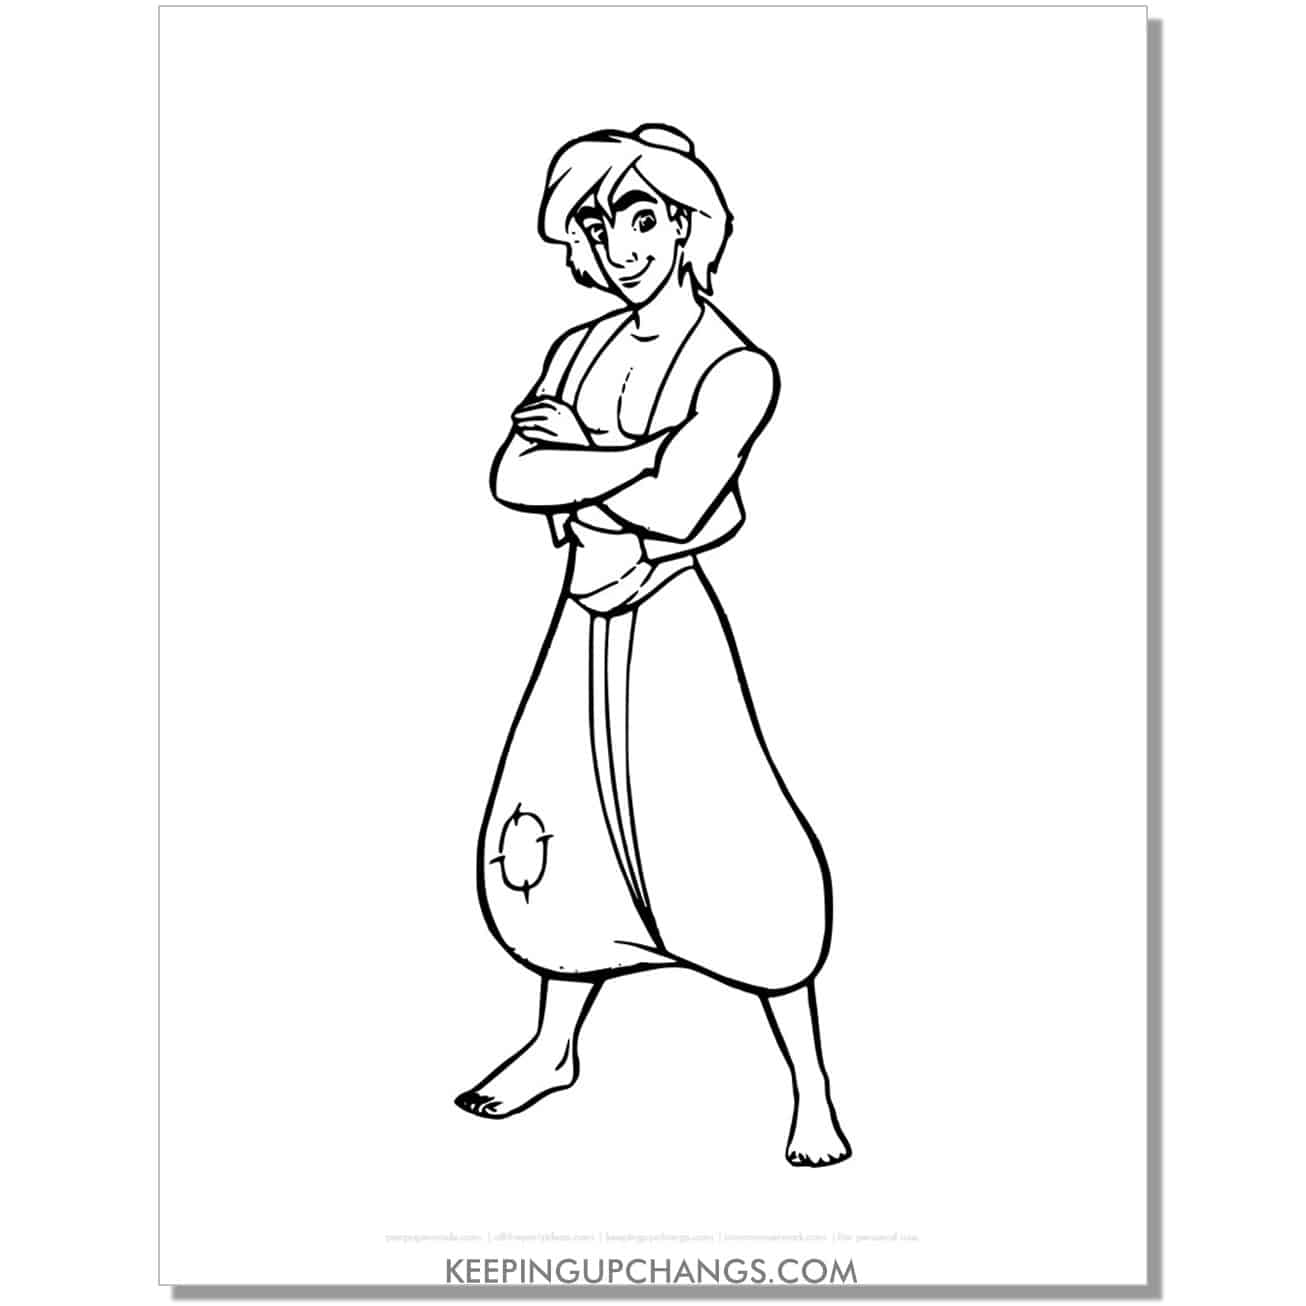 aladdin with arms crossed coloring page, sheet.